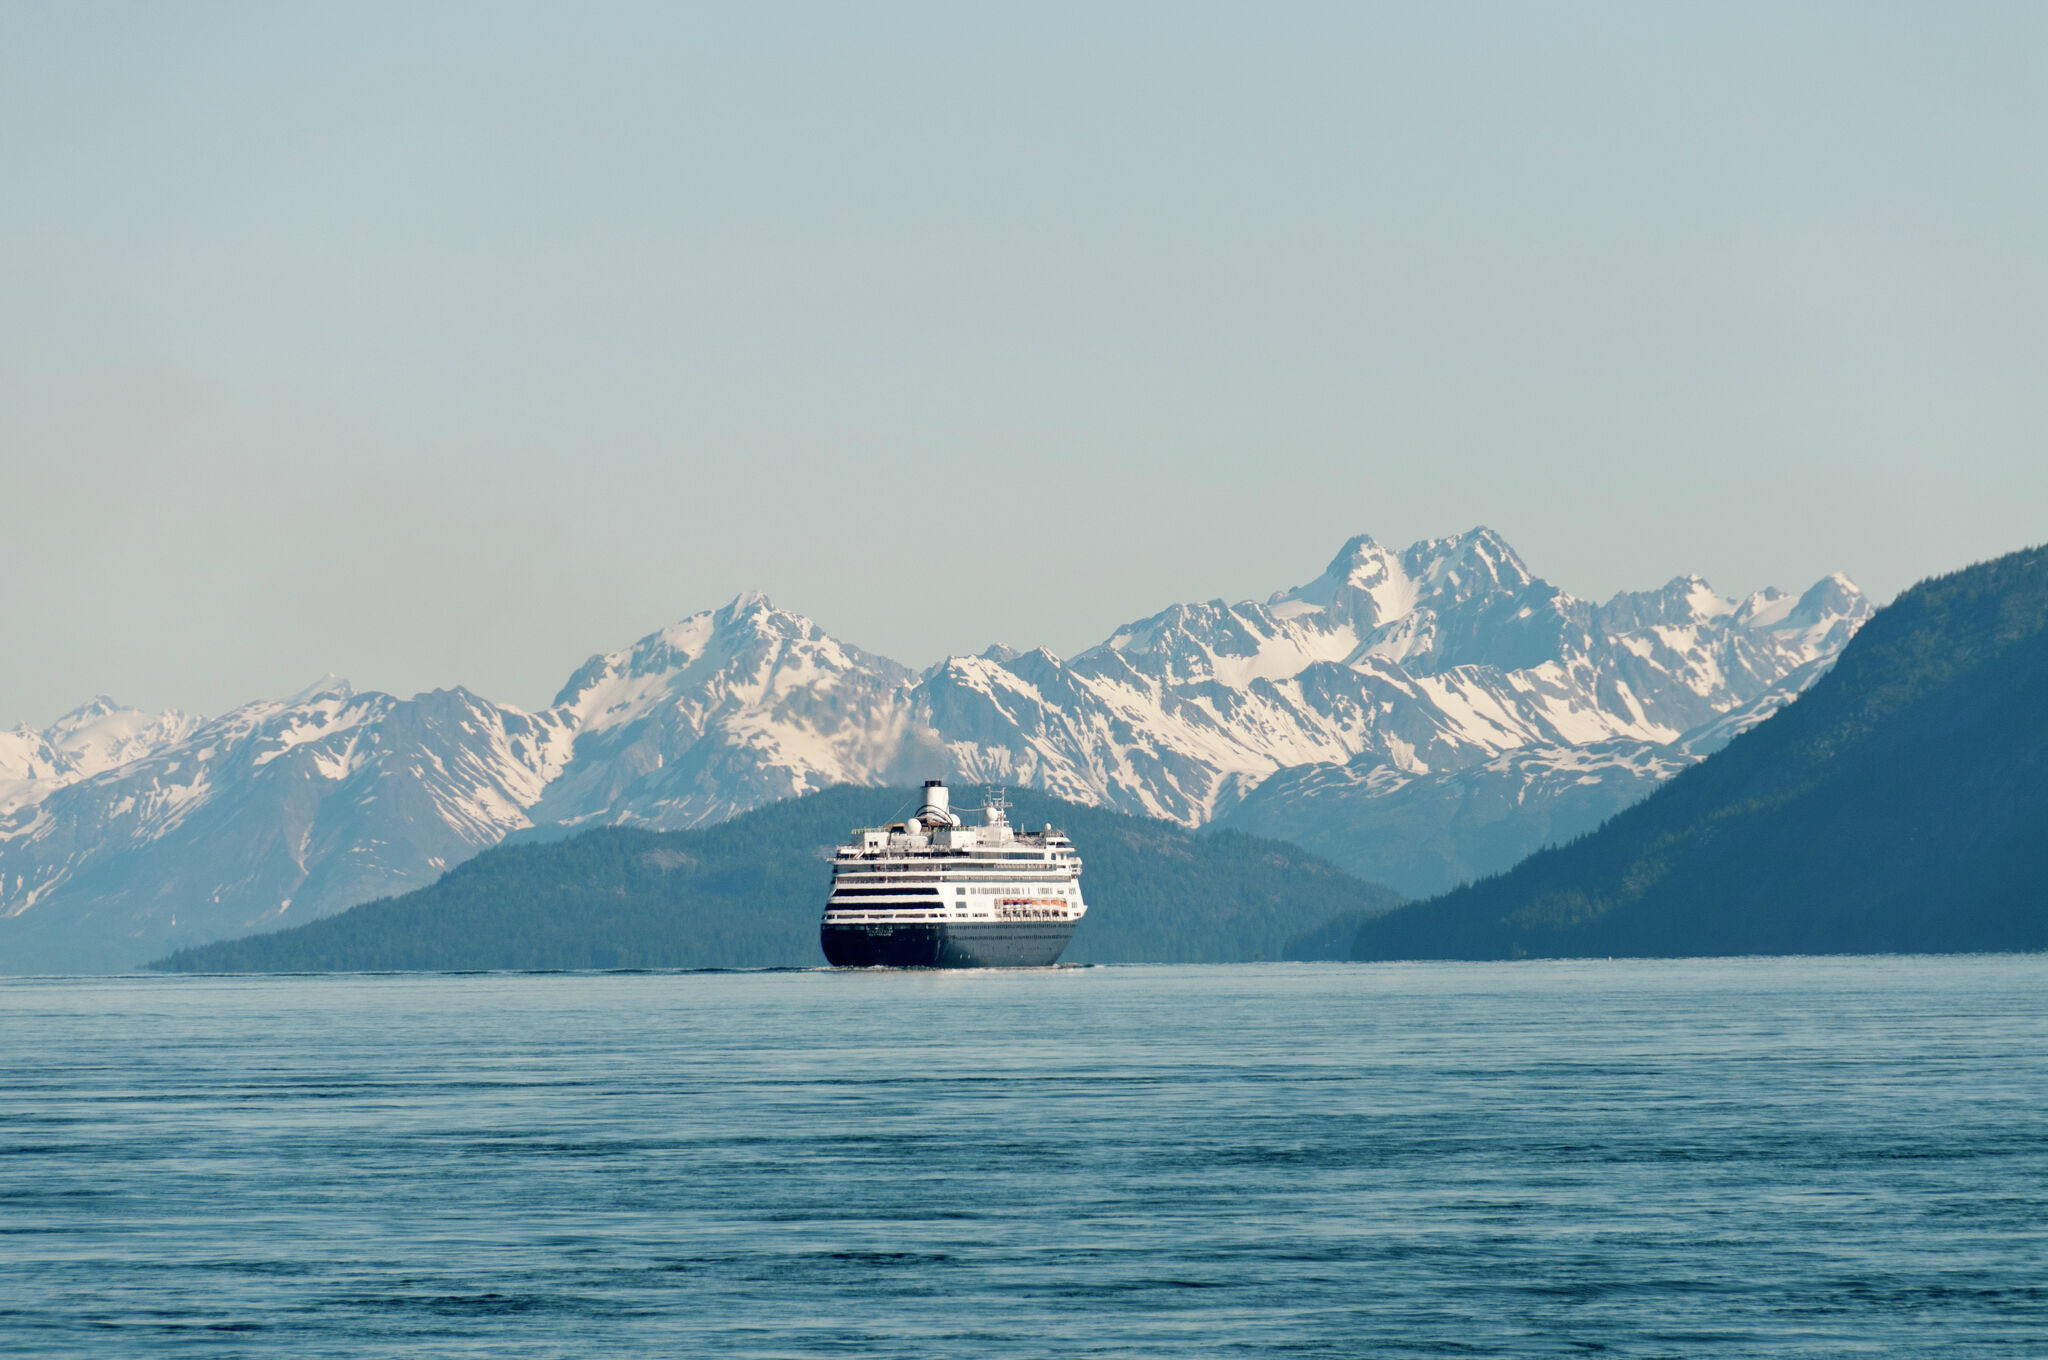 Cruises from San Francisco to Alaska: Best deals in 2023